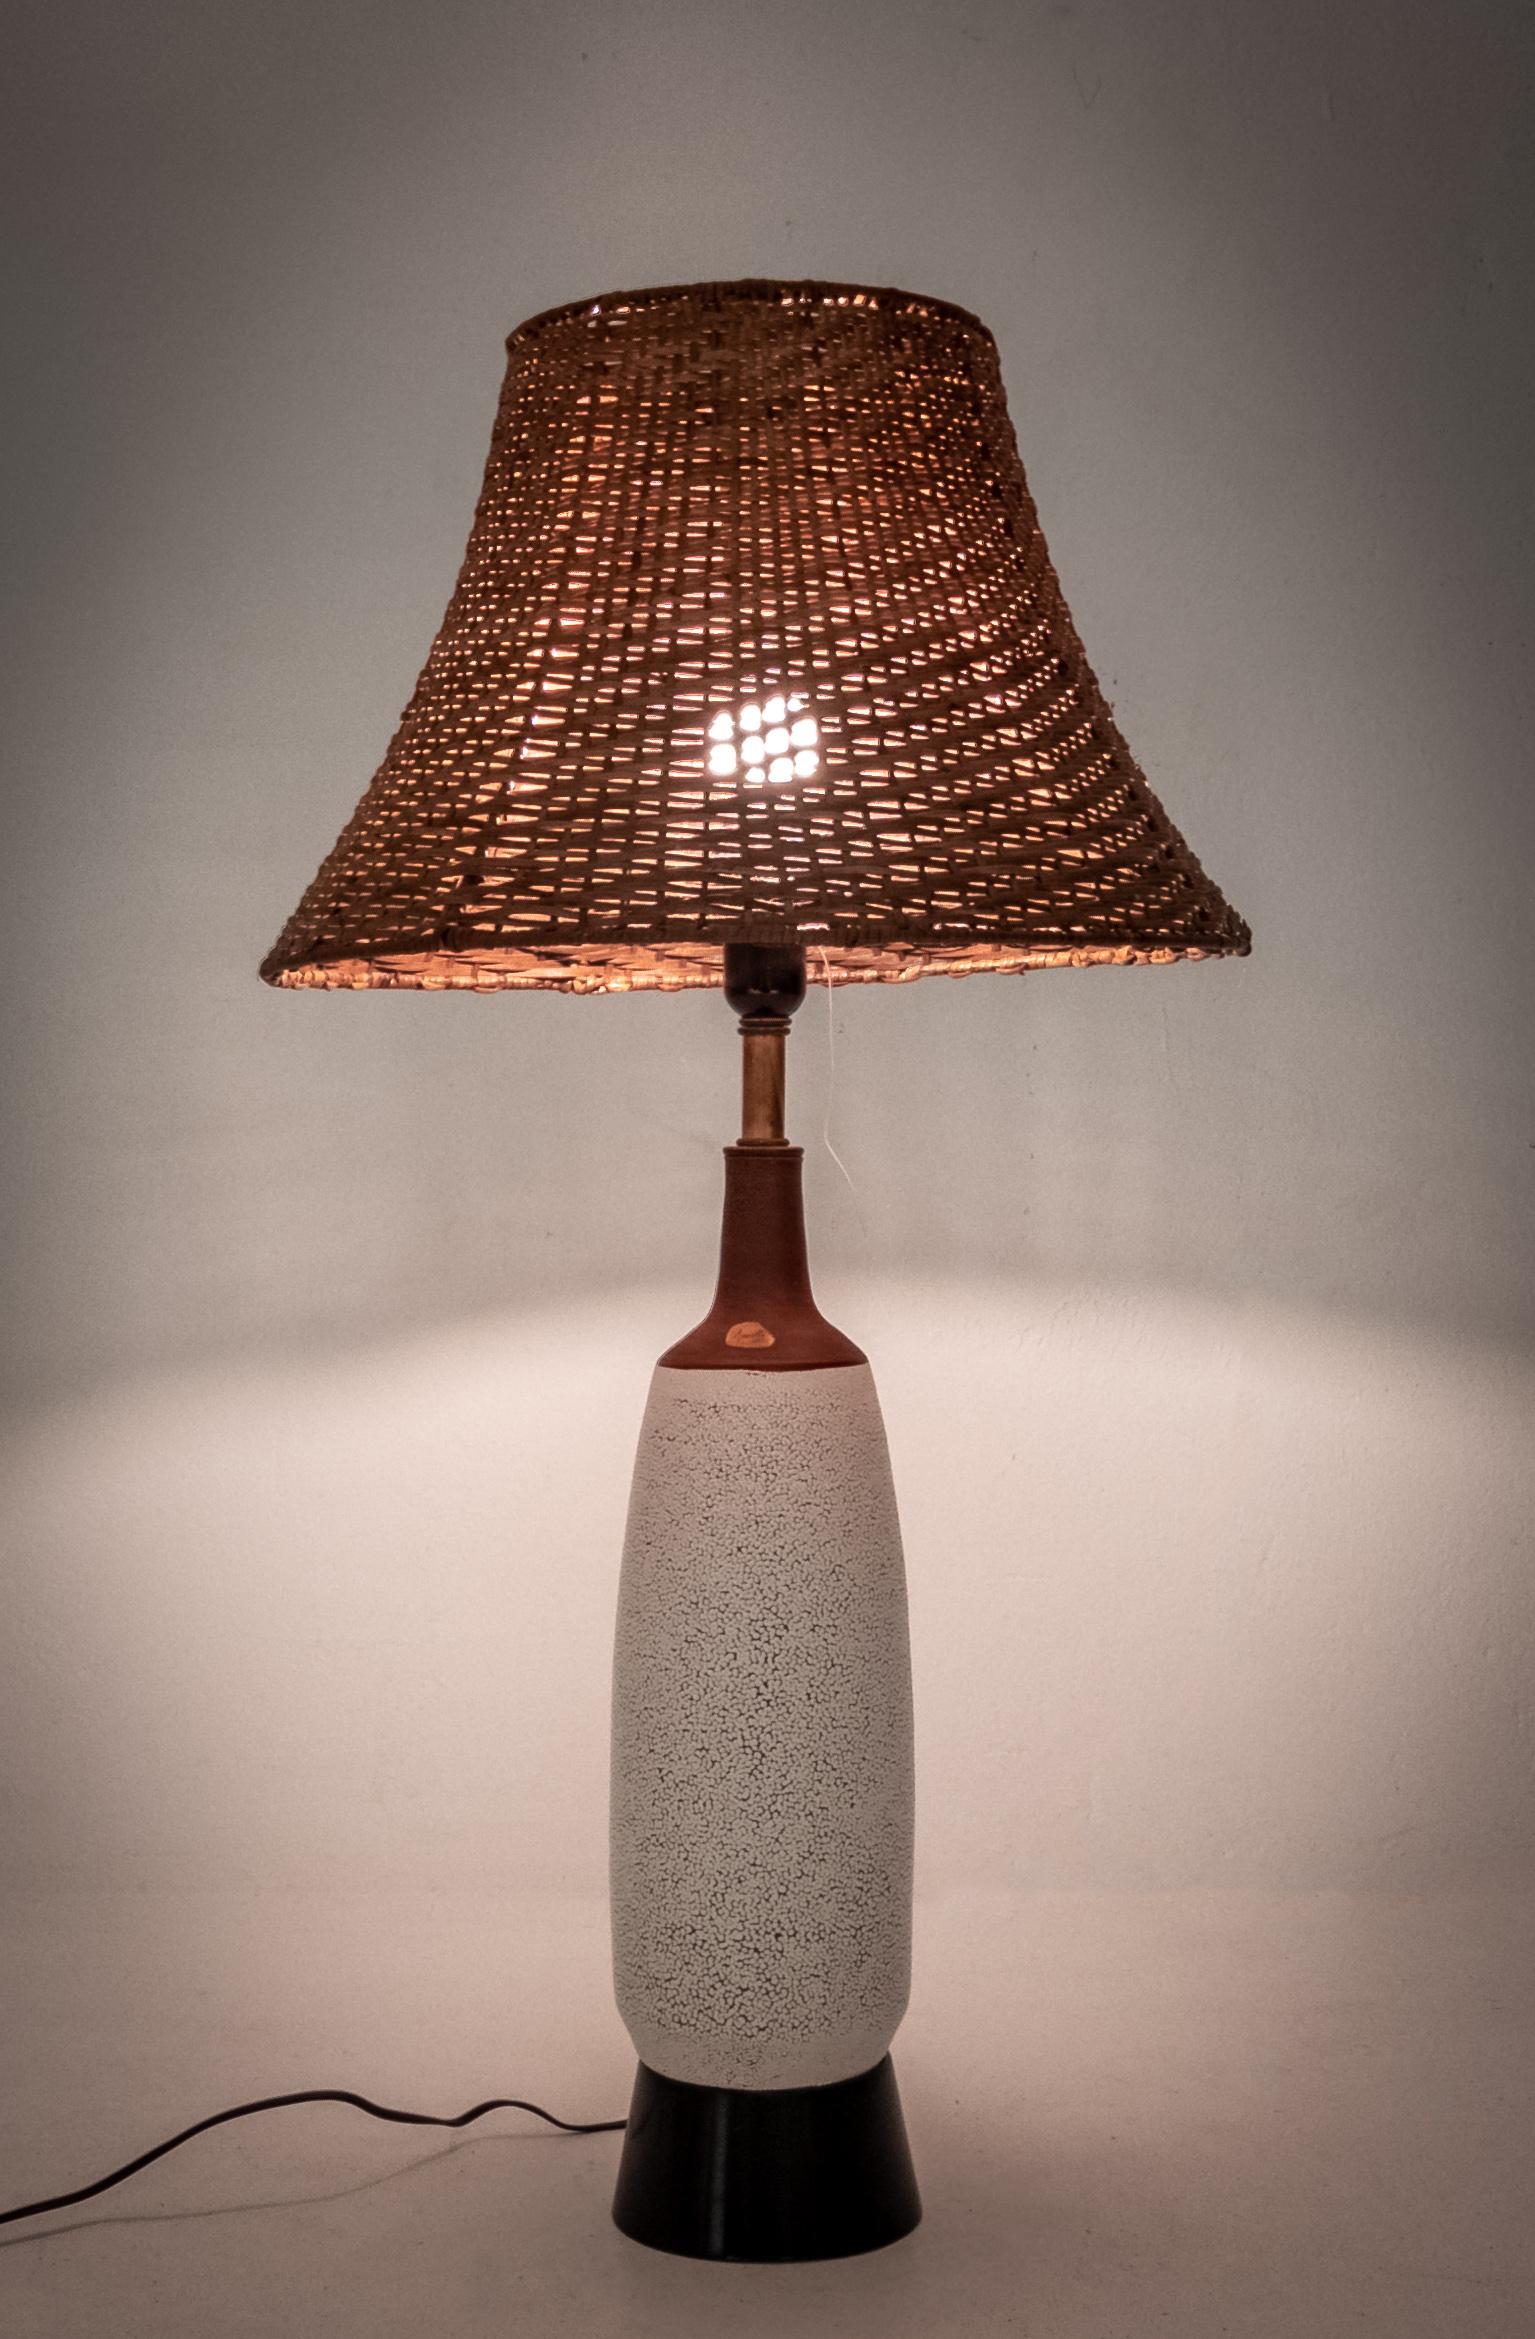 Large ceramic table lamp. Design Jaap Ravelli. Dutch Made by Ravelli potterie Valkenburg ZH 1942 /1977
This rare unique piece is handmade by the master. High wooden feet with a ceramic bottle shape stand. With the original sticker. Pull down